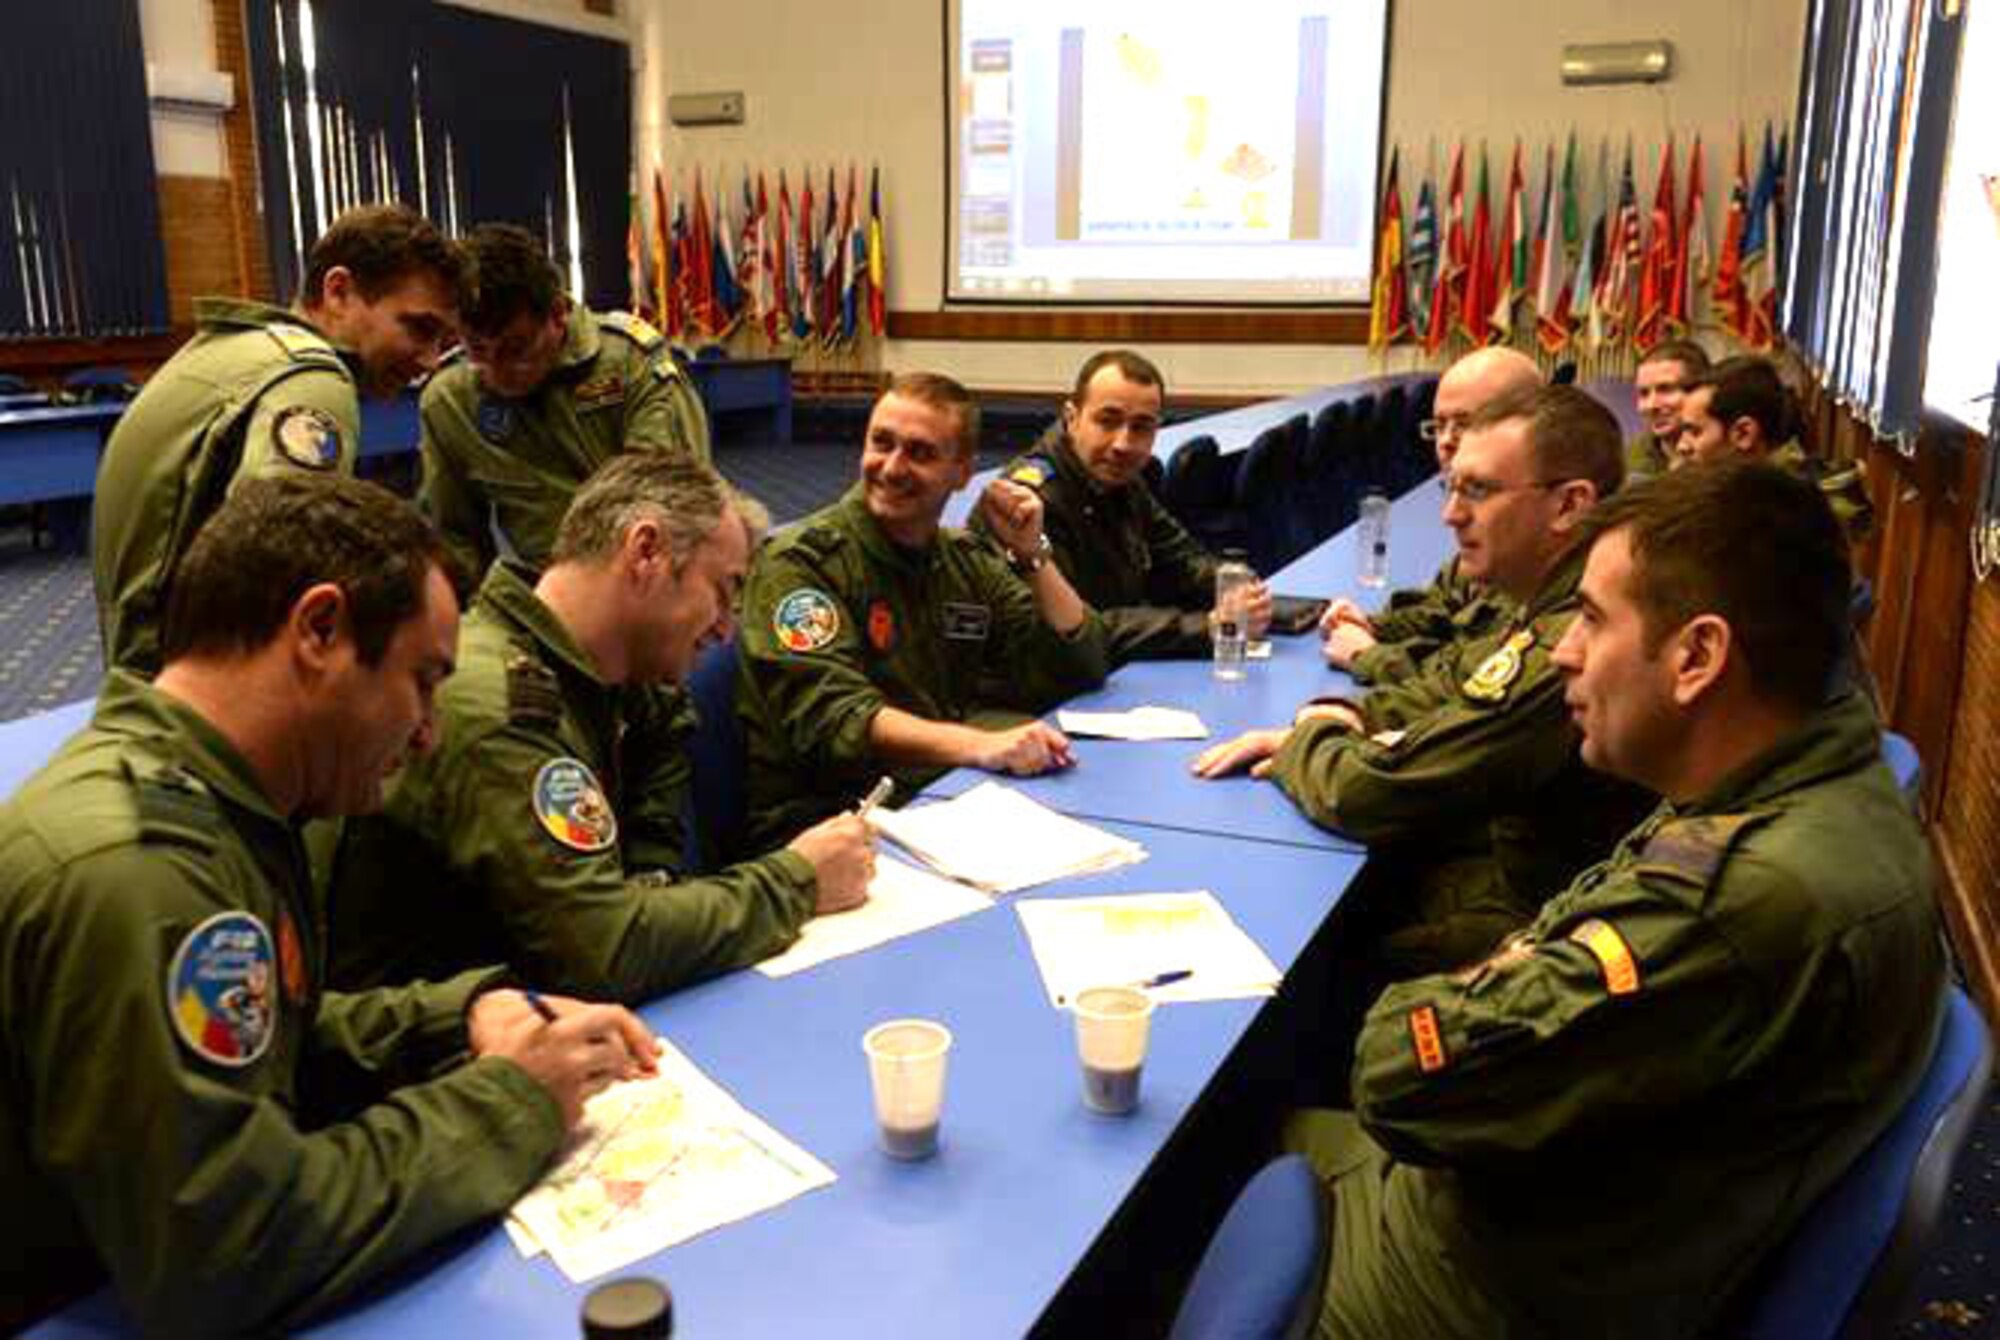 Aircrew from the U.S. Air Force and the Romanian air force discuss flight plans during the first air refueling training between the two countries Feb. 27, 2017, in Bucharest, Romania. The crew from the 100th Air Refueling Wing from RAF Mildenhall, England, travelled to Bucharest to train and certify the RoAF F-16 Fighting Falcon fleet on air refueling with a U.S. tanker. (U.S. Air Force photo by Staff Sgt. Kate Thornton)